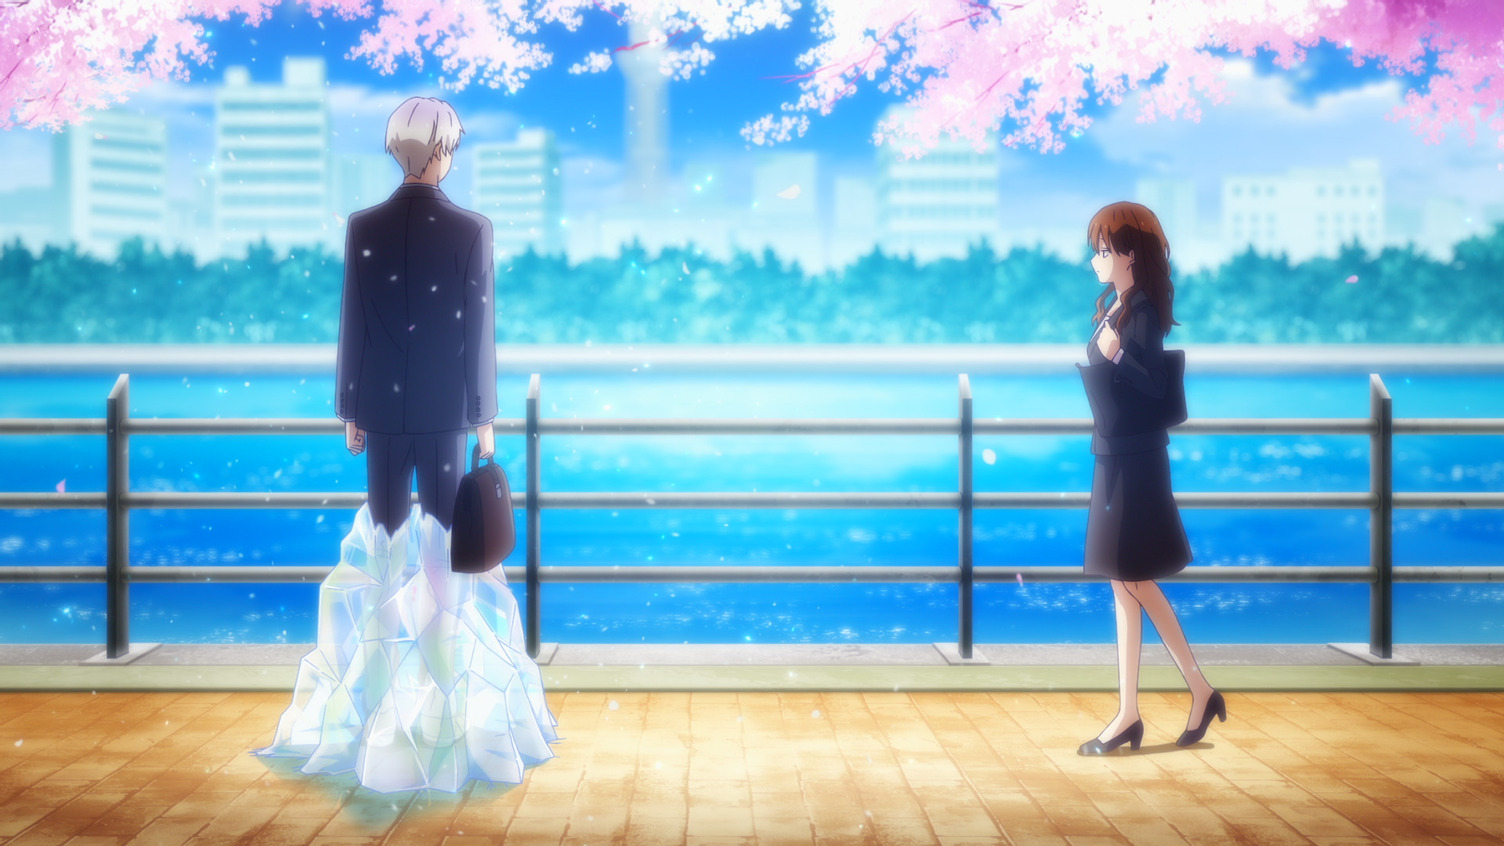 The Ice Guy and His Cool Female Colleague anime header